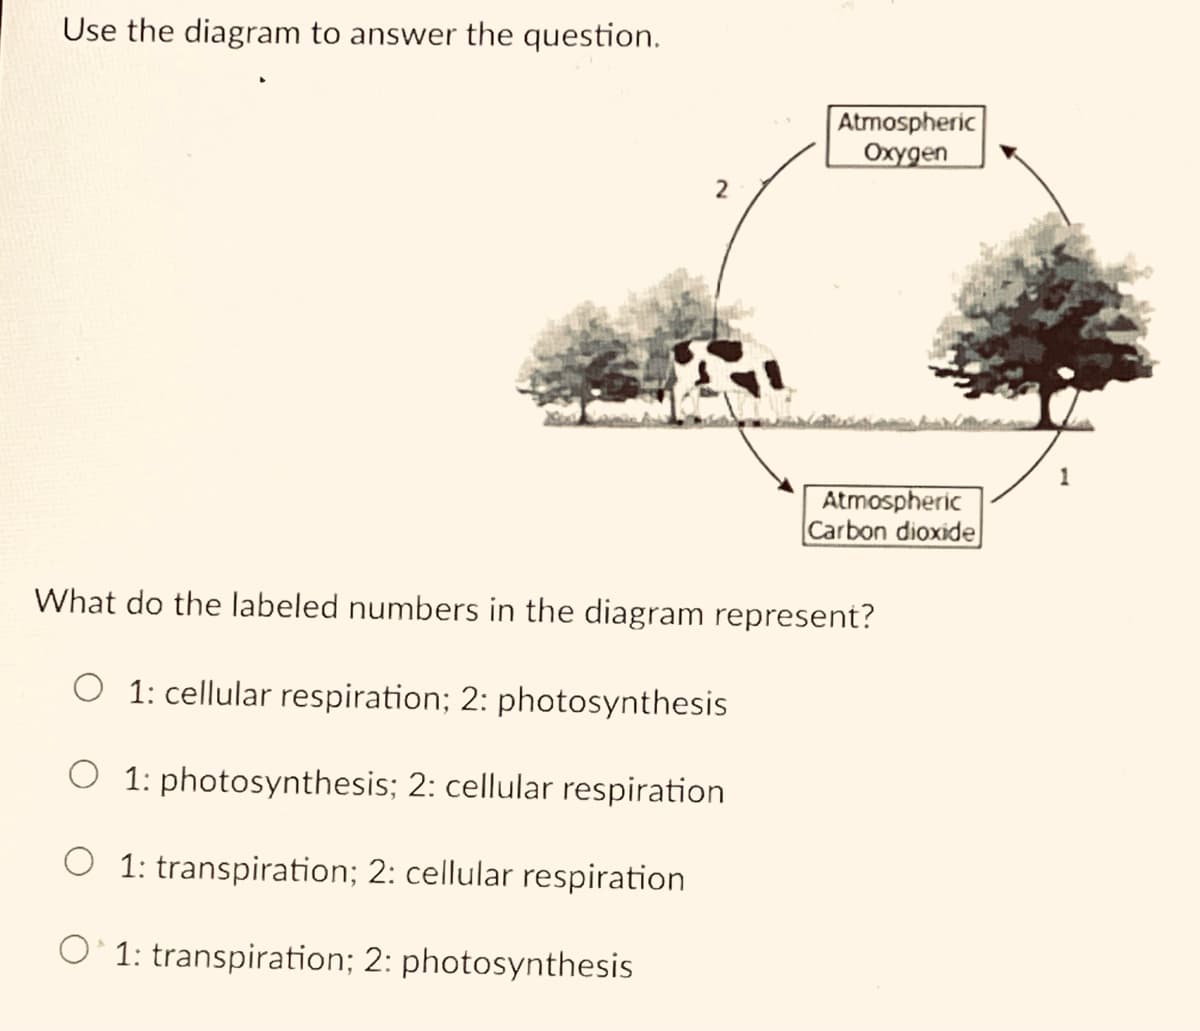 Use the diagram to answer the question.
Atmospheric
Охудеn
Atmospheric
Carbon dioxide
What do the labeled numbers in the diagram represent?
O 1: cellular respiration; 2: photosynthesis
O 1: photosynthesis; 2: cellular respiration
O 1: transpiration; 2: cellular respiration
O'1: transpiration; 2: photosynthesis
